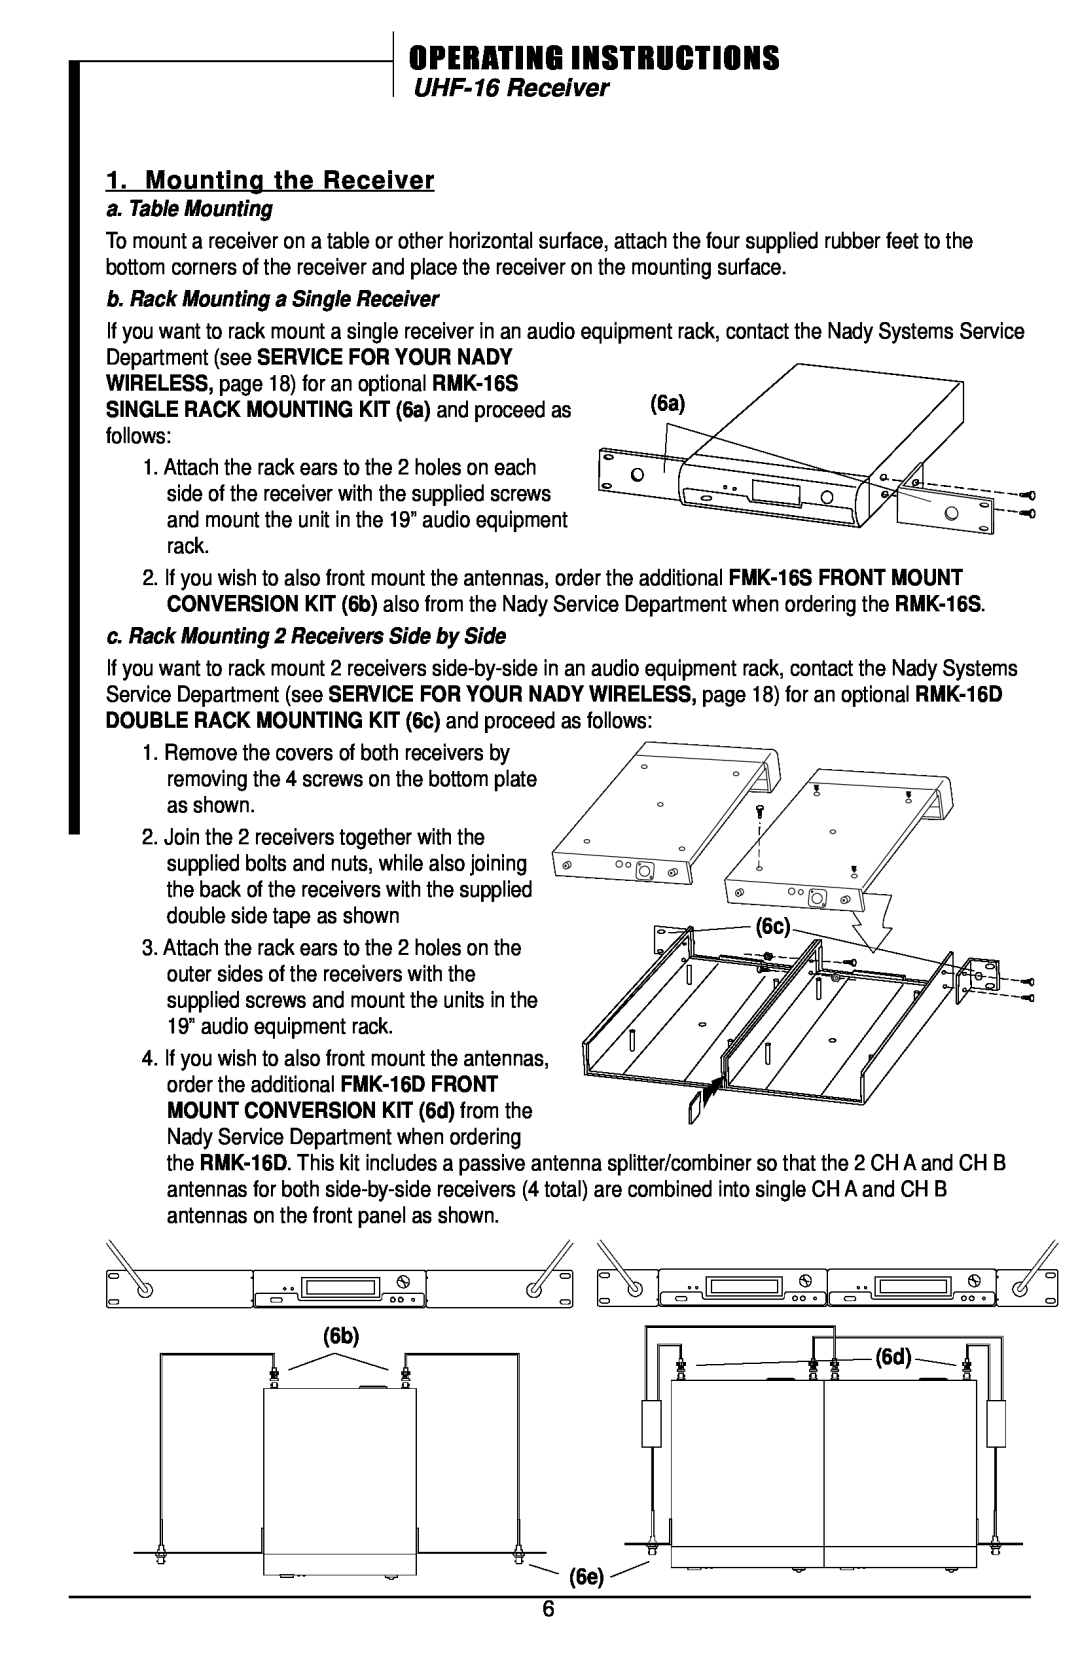 Nady Systems owner manual Operating Instructions, UHF-16Receiver, Mounting the Receivera. Table Mounting 